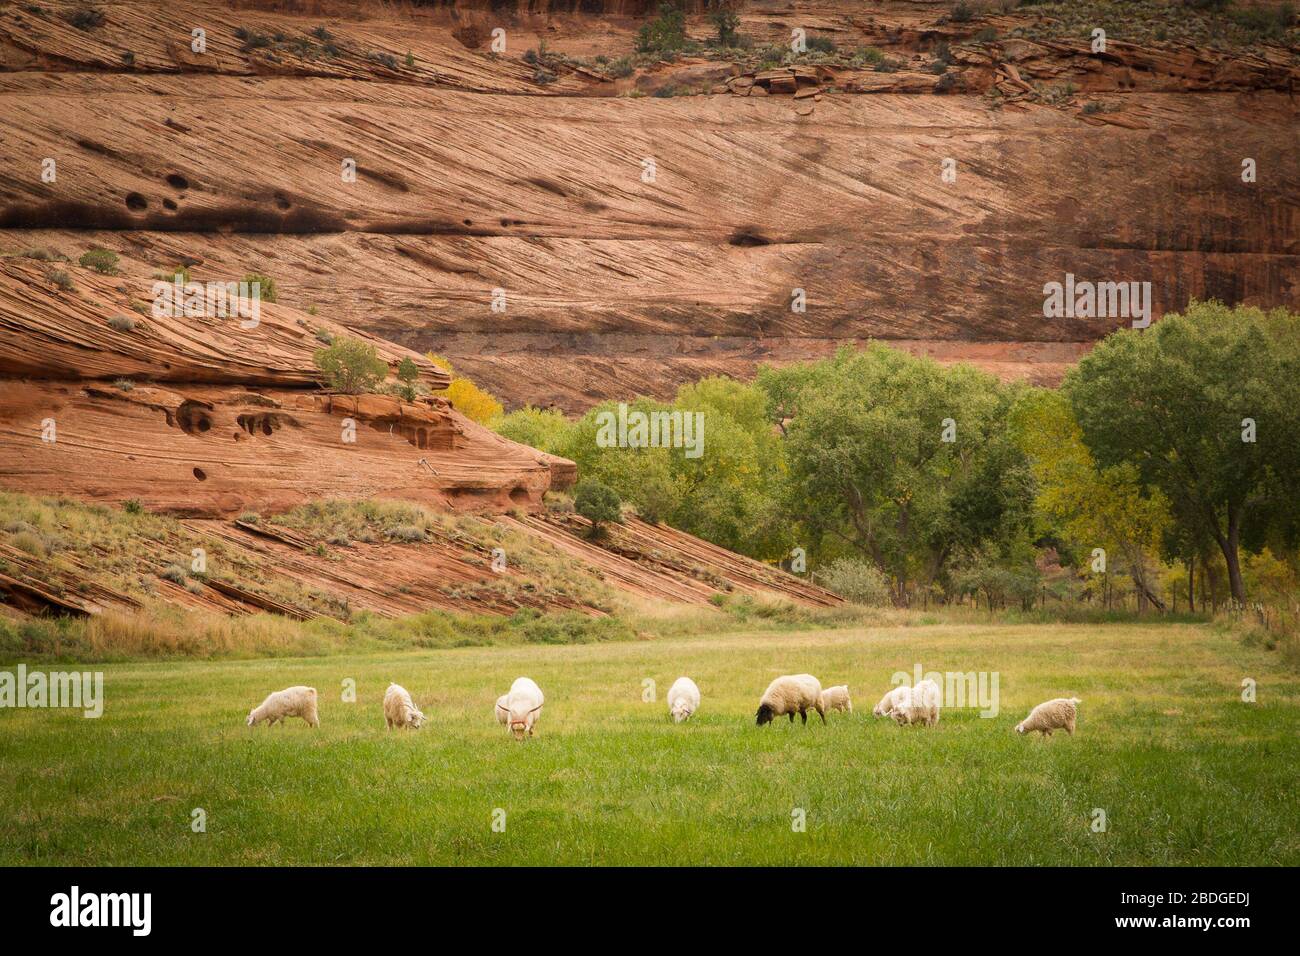 A flock of sheep and goats graze of green grass near a hogan in Canyon de Chelly on the Navajo Indian reservation in northern Arizona. Stock Photo